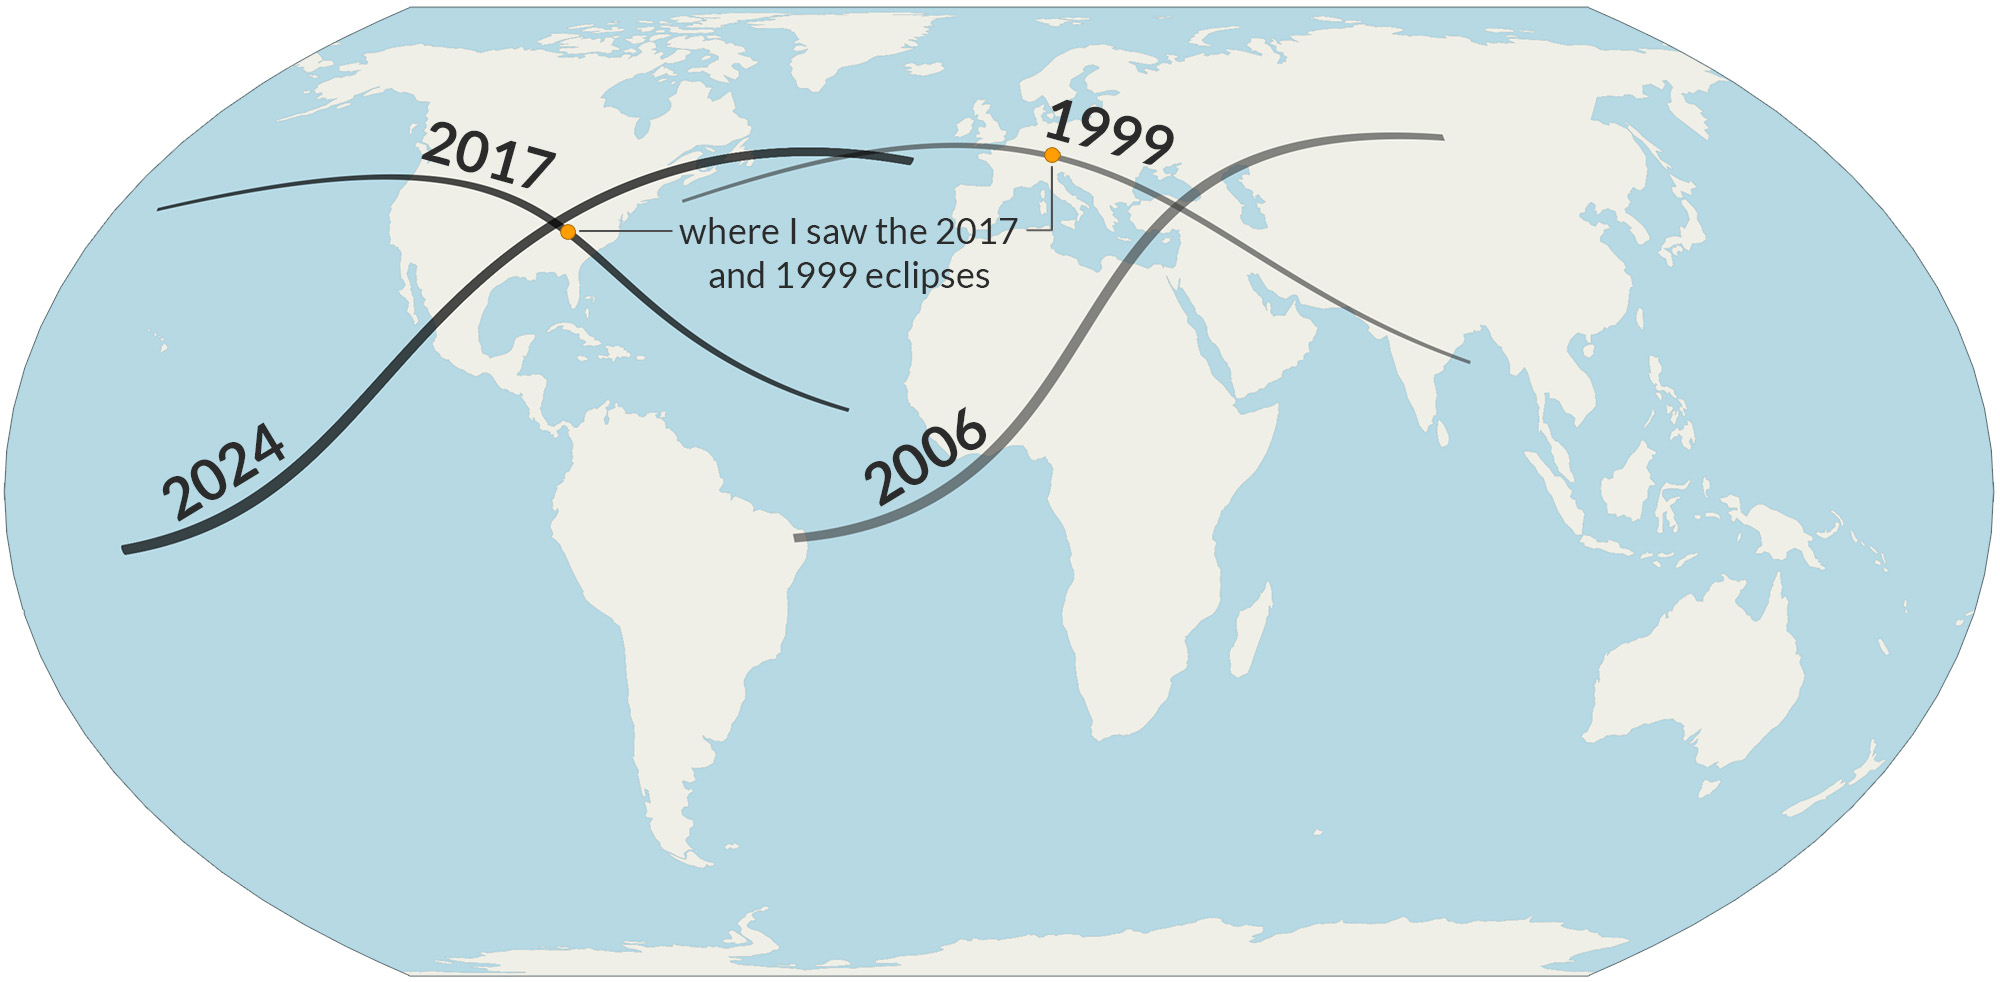 map showing related paths of the 2024 and 2006 eclipses, and the 2017 and 1999 eclipses